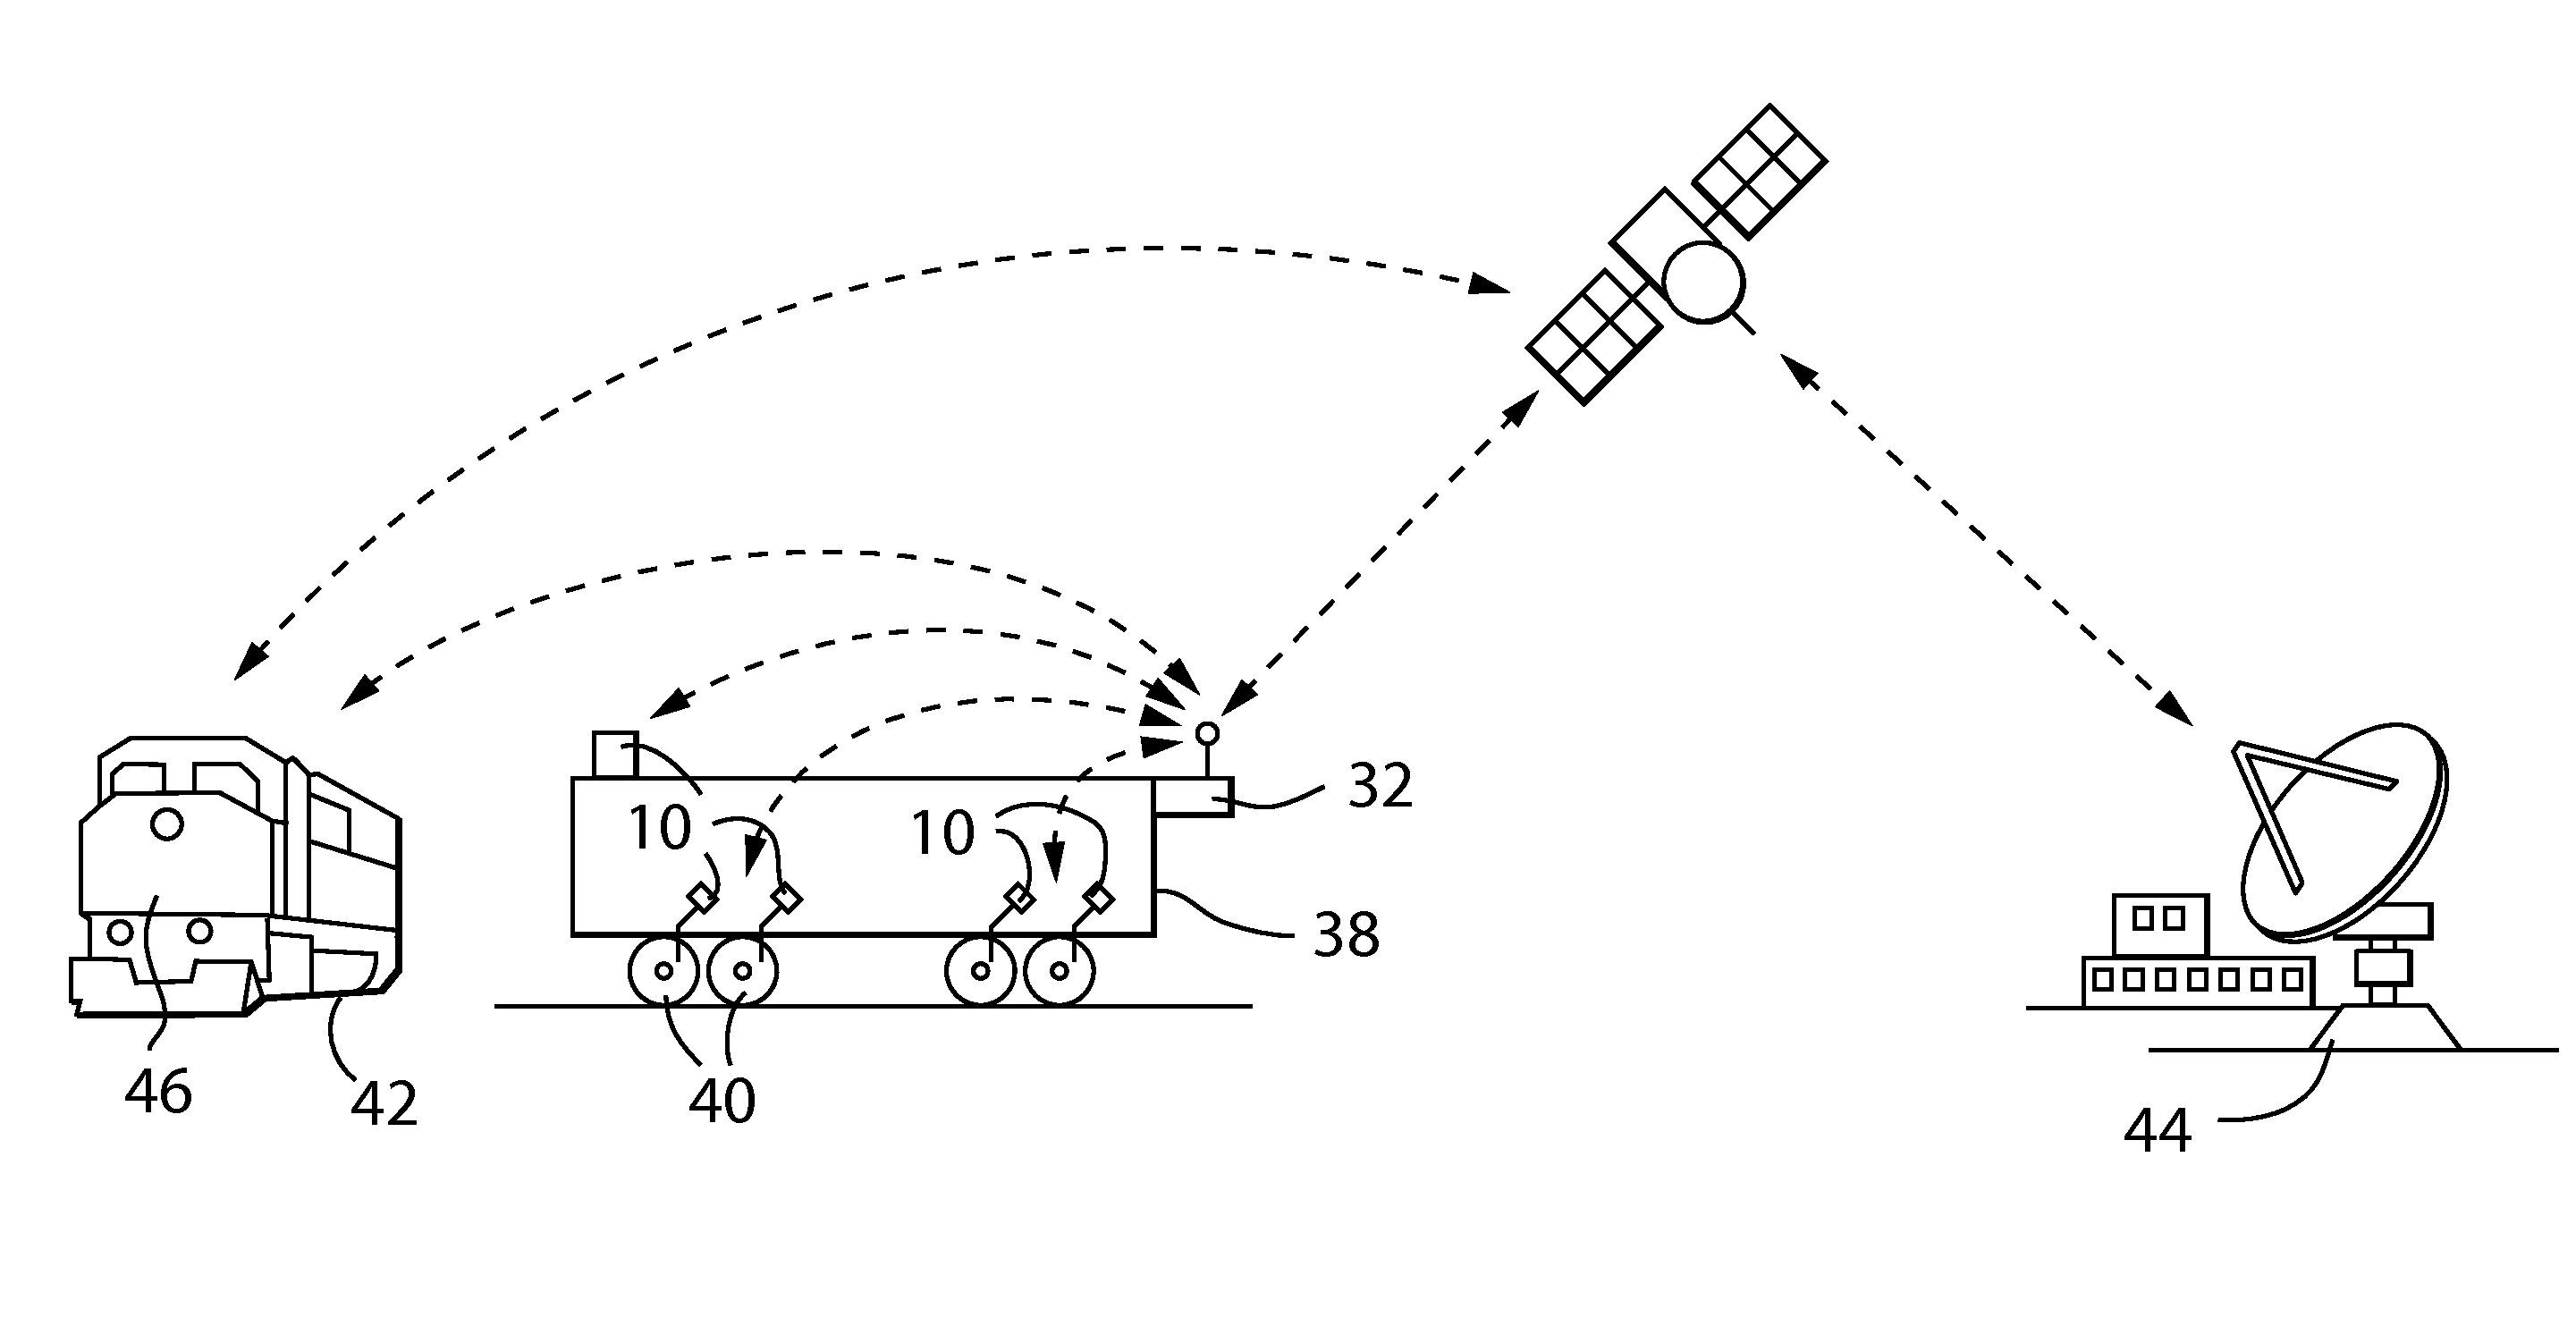 System and Method for Monitoring Railcar Performance